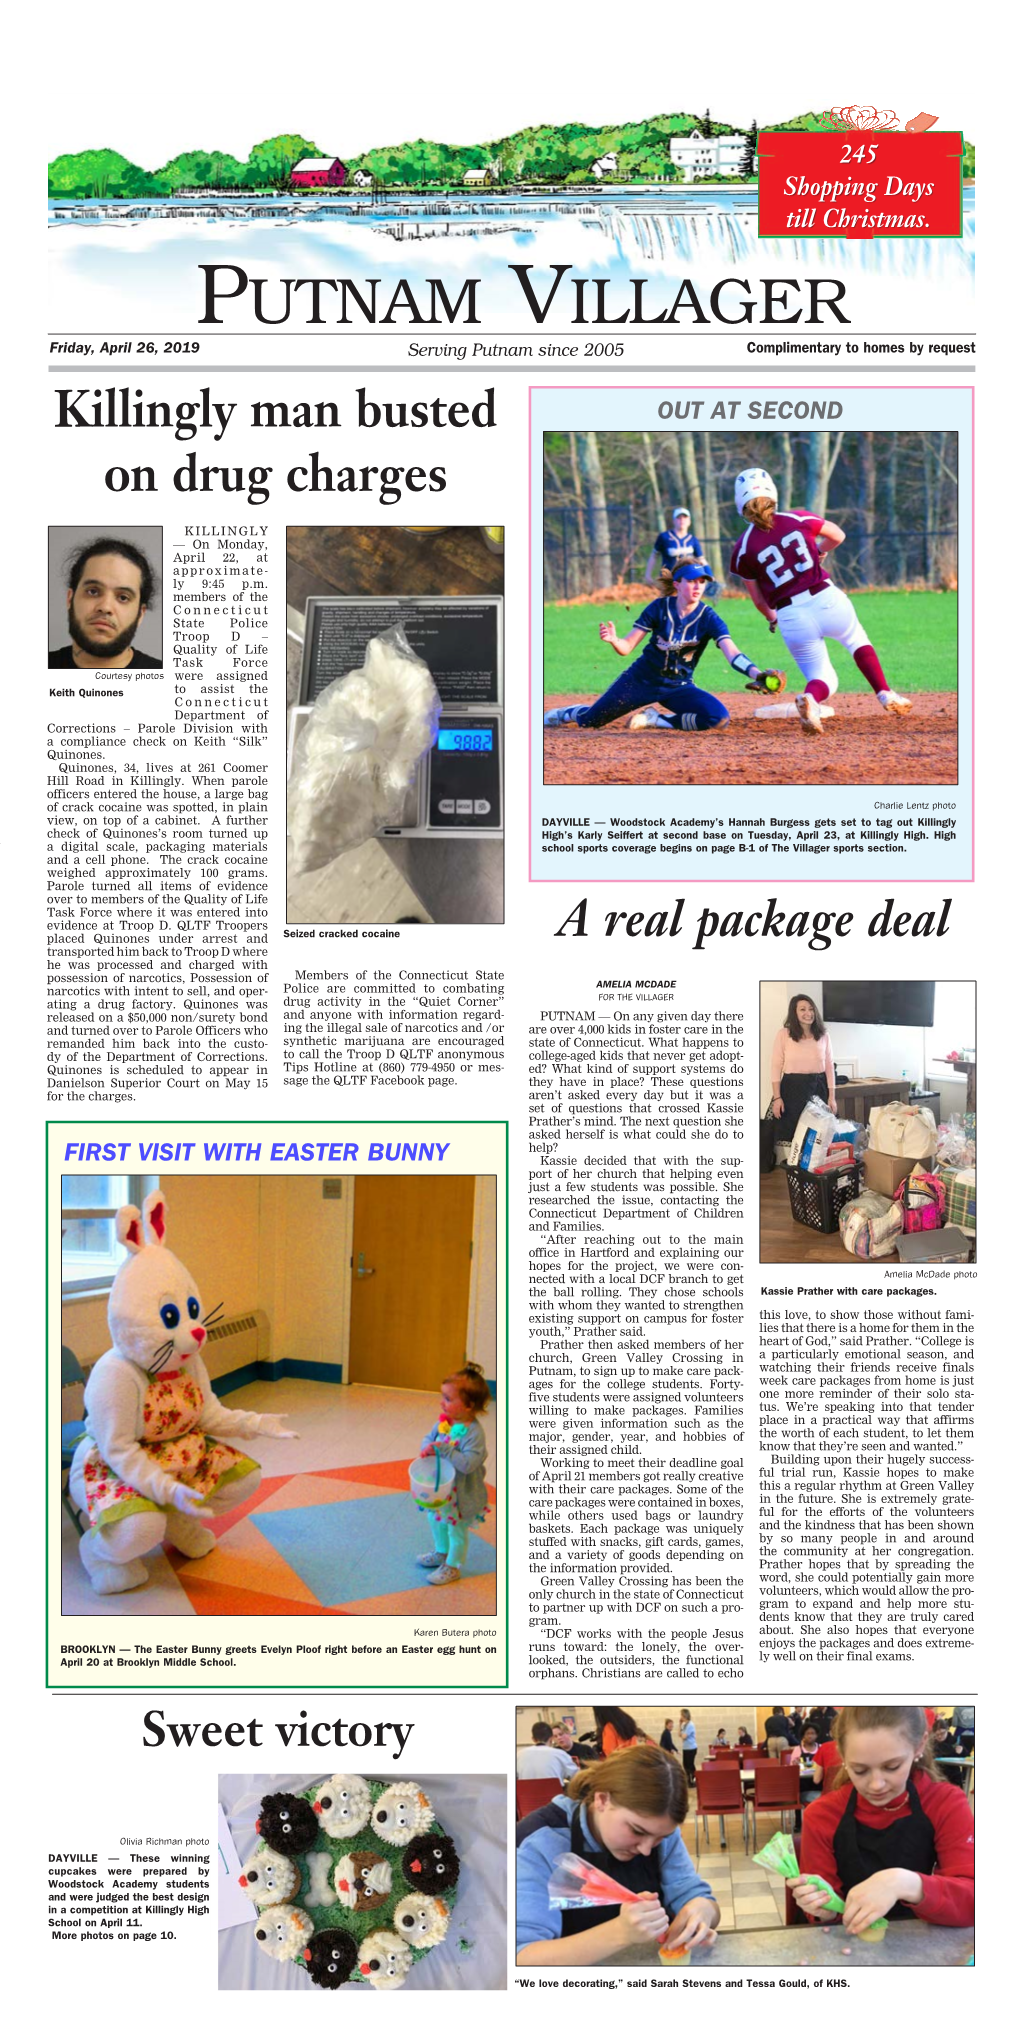 Putnam Villager Friday, April 26, 2019 Serving Putnam Since 2005 Complimentary to Homes by Request Killingly Man Busted out at SECOND on Drug Charges